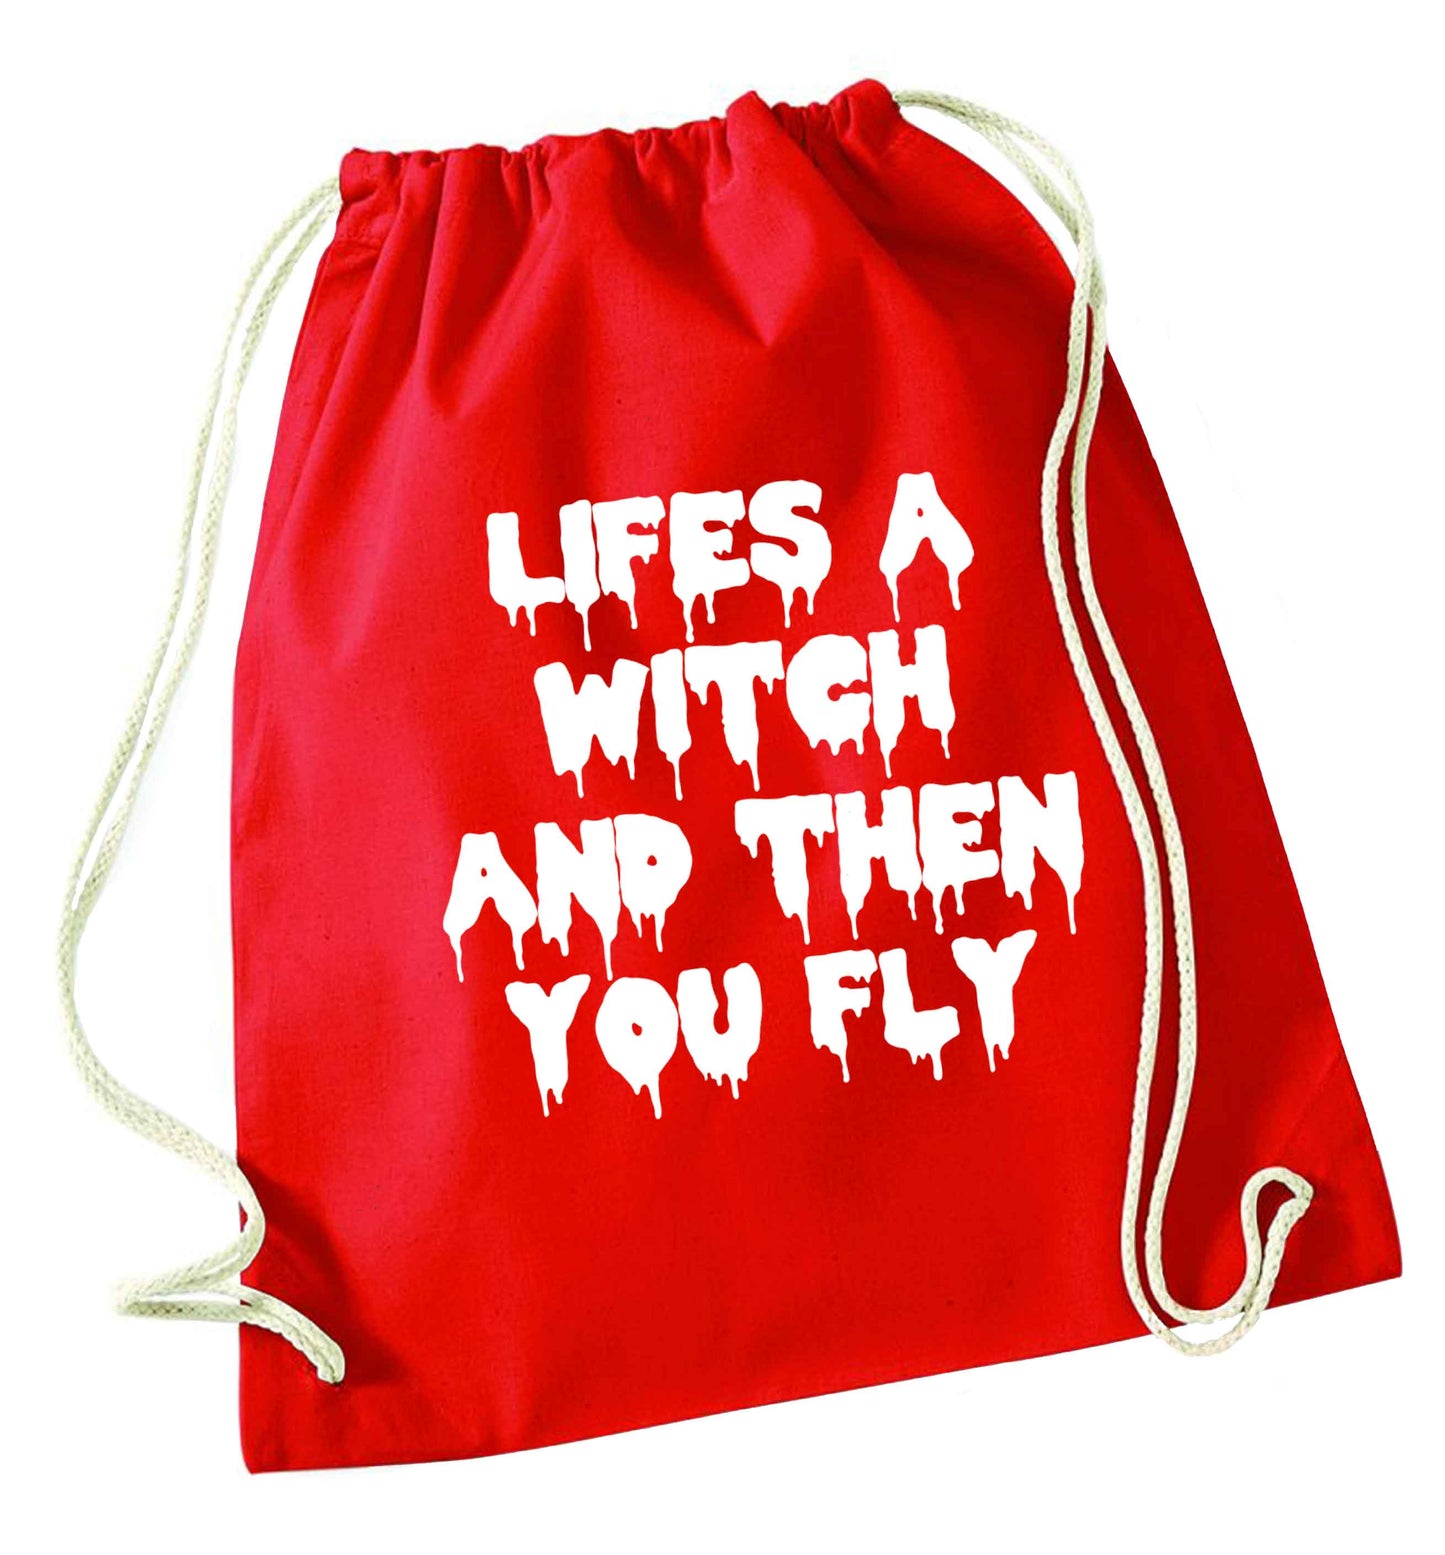 Life's a witch and then you fly red drawstring bag 